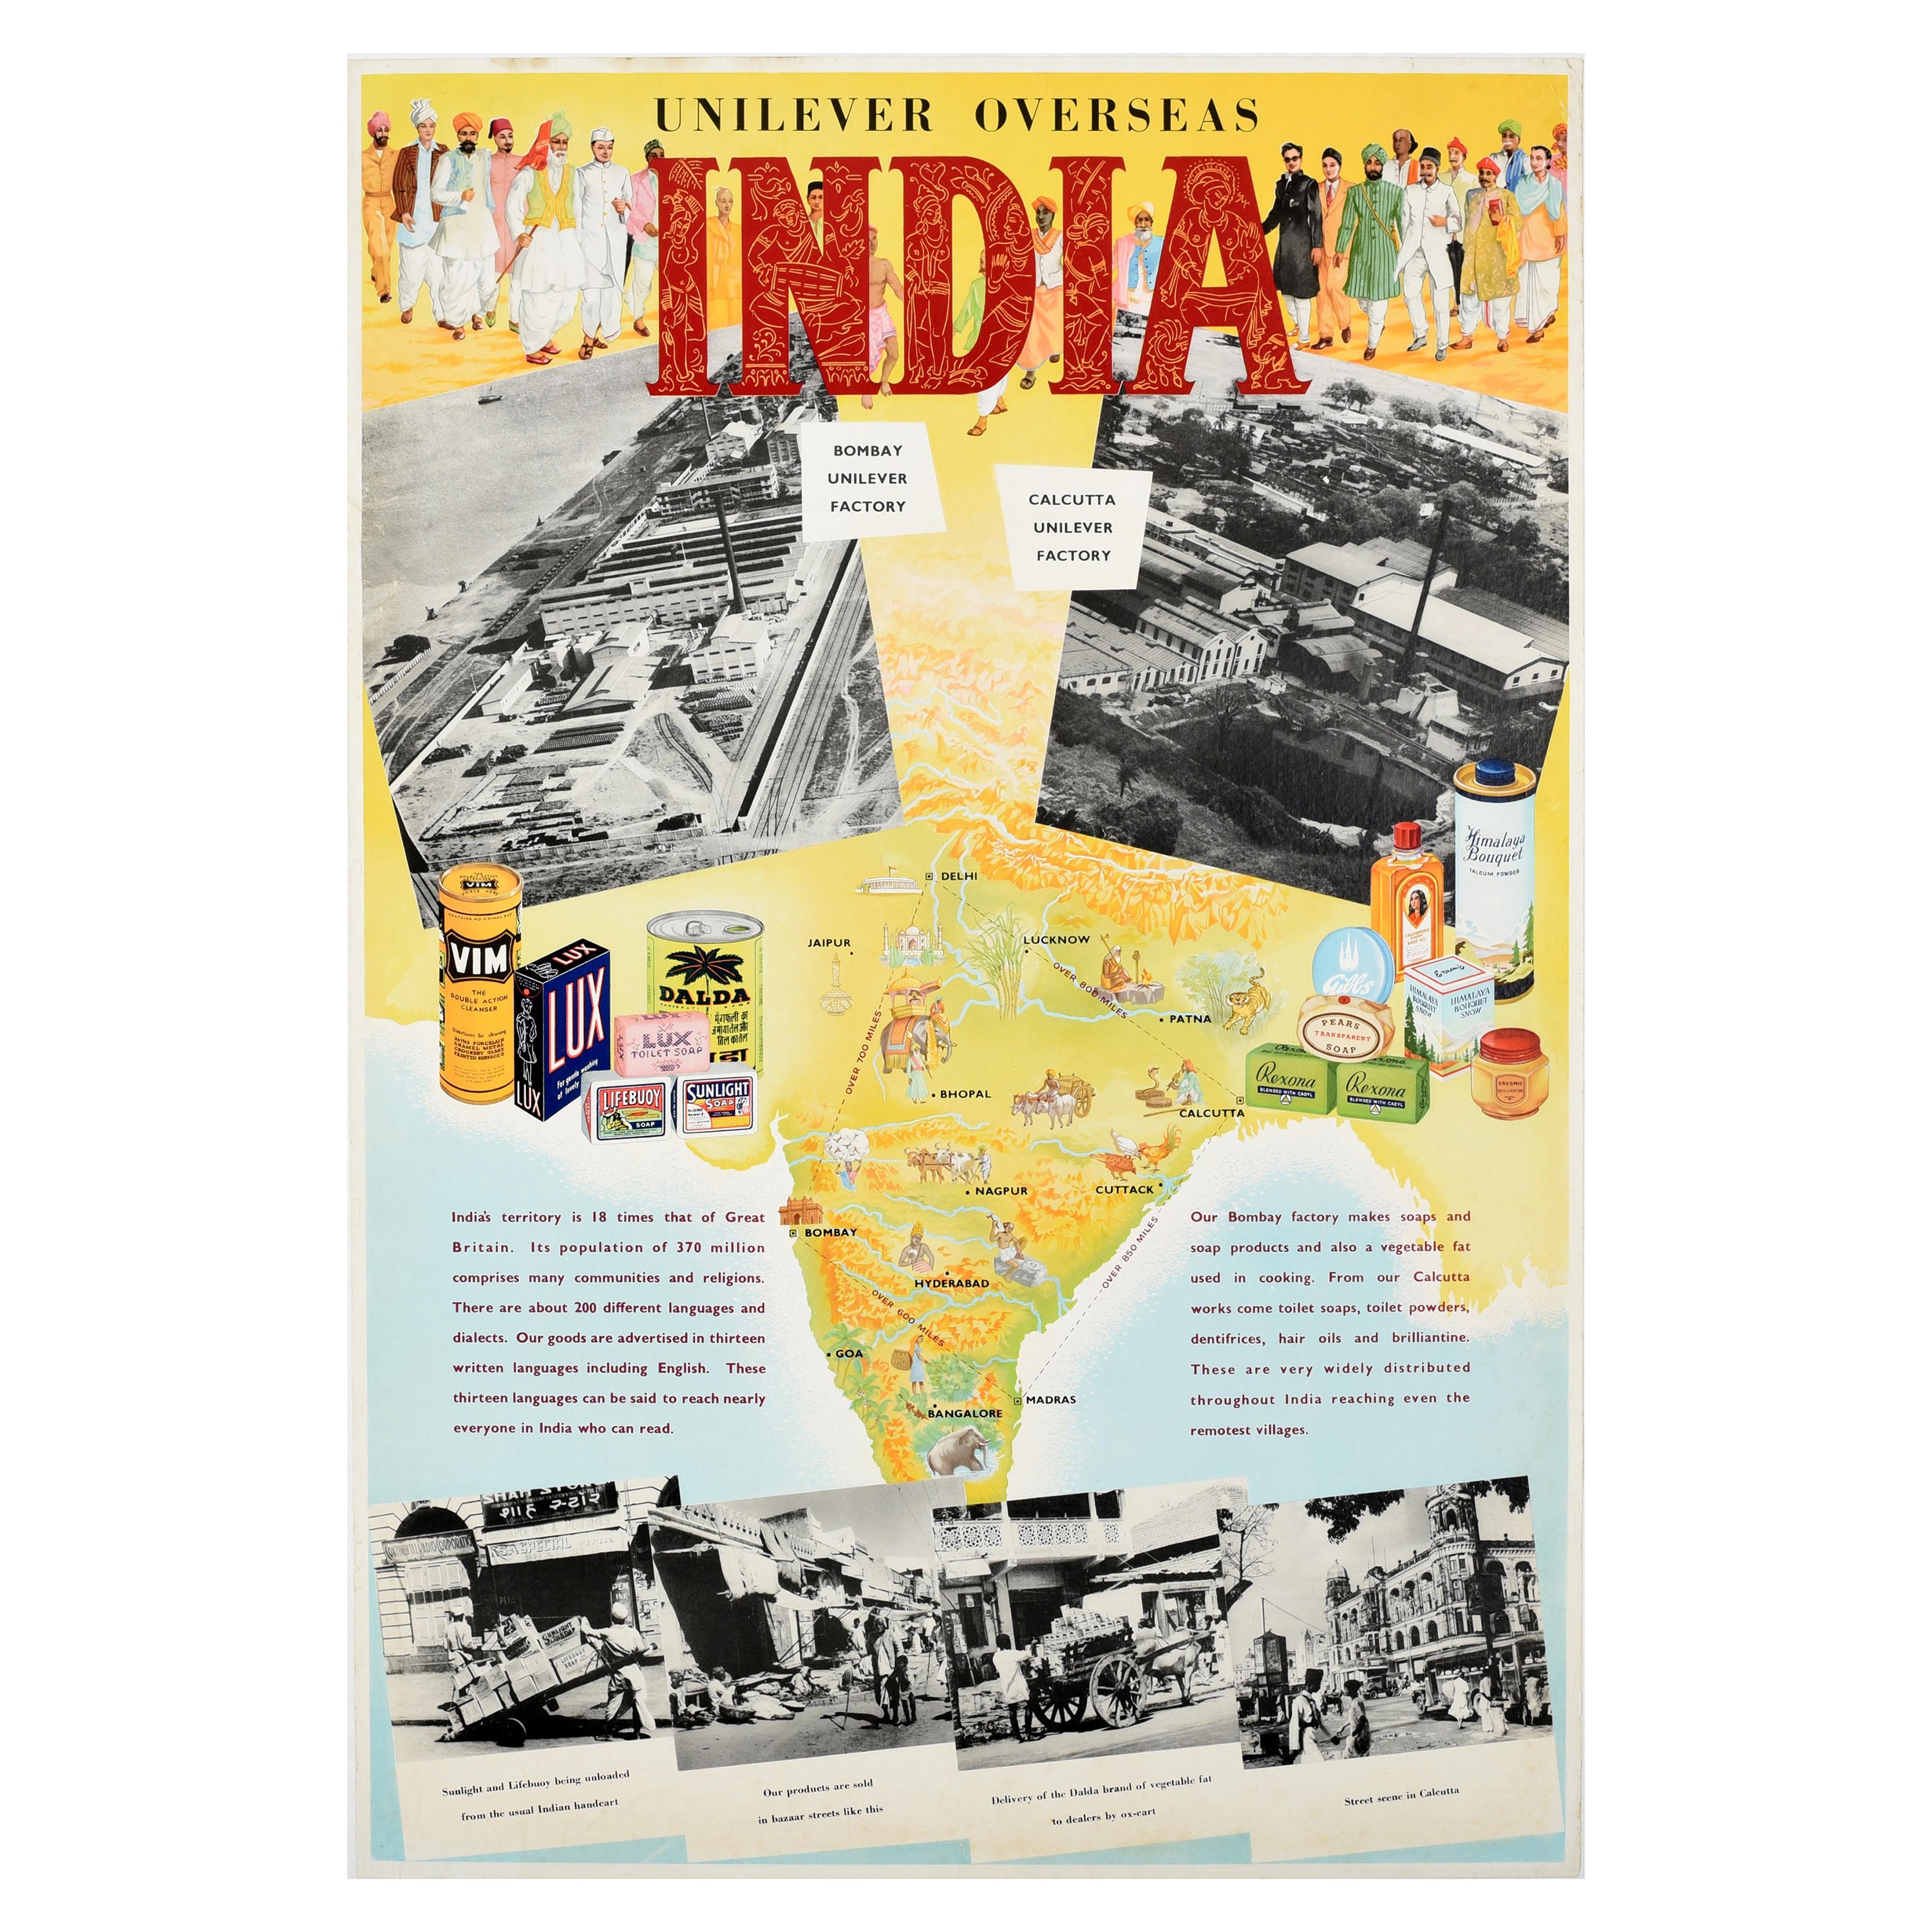 Original Vintage Advertising Poster Unilever Overseas India Illustrated Map For Sale